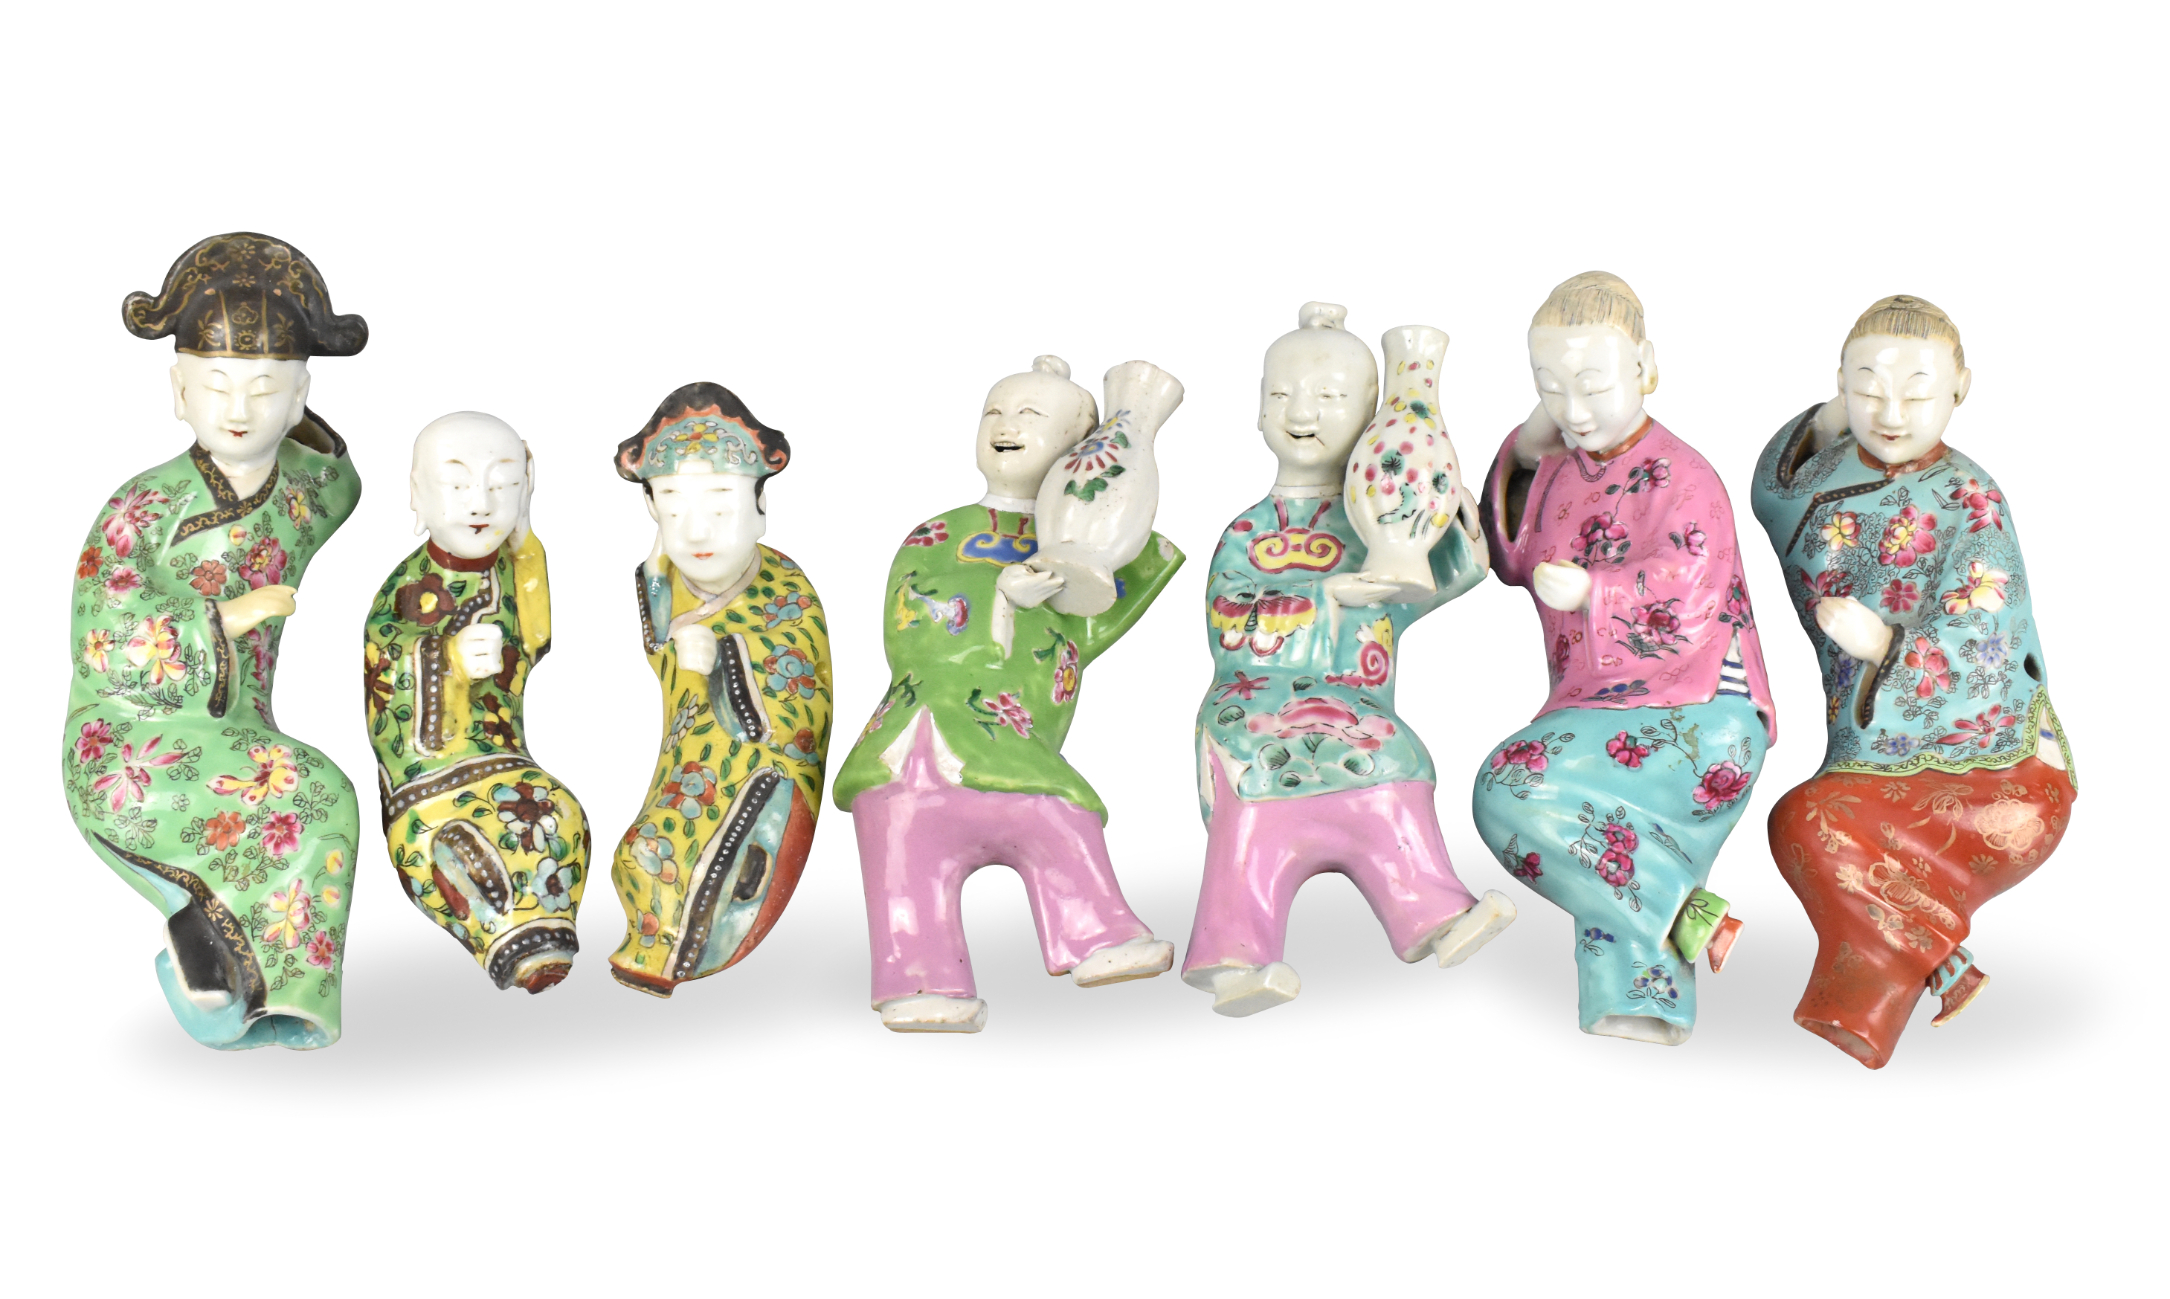 7 CHINESE FAMILLE ROSE WALL FIGURES 339d87